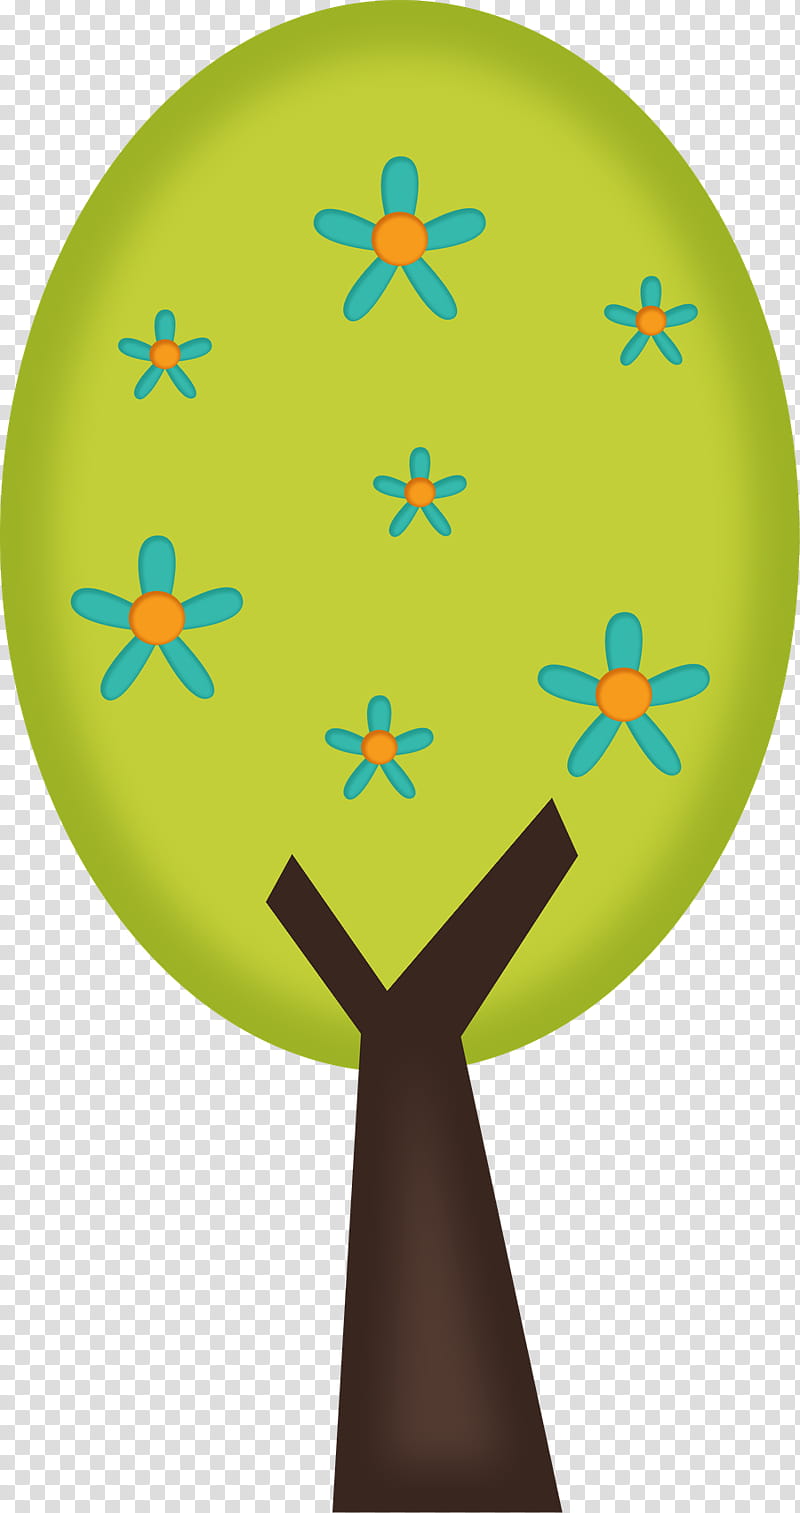 Balloon Drawing, Tree, Garden, Painting, Quilt, Chery, Shrub, Symbol transparent background PNG clipart